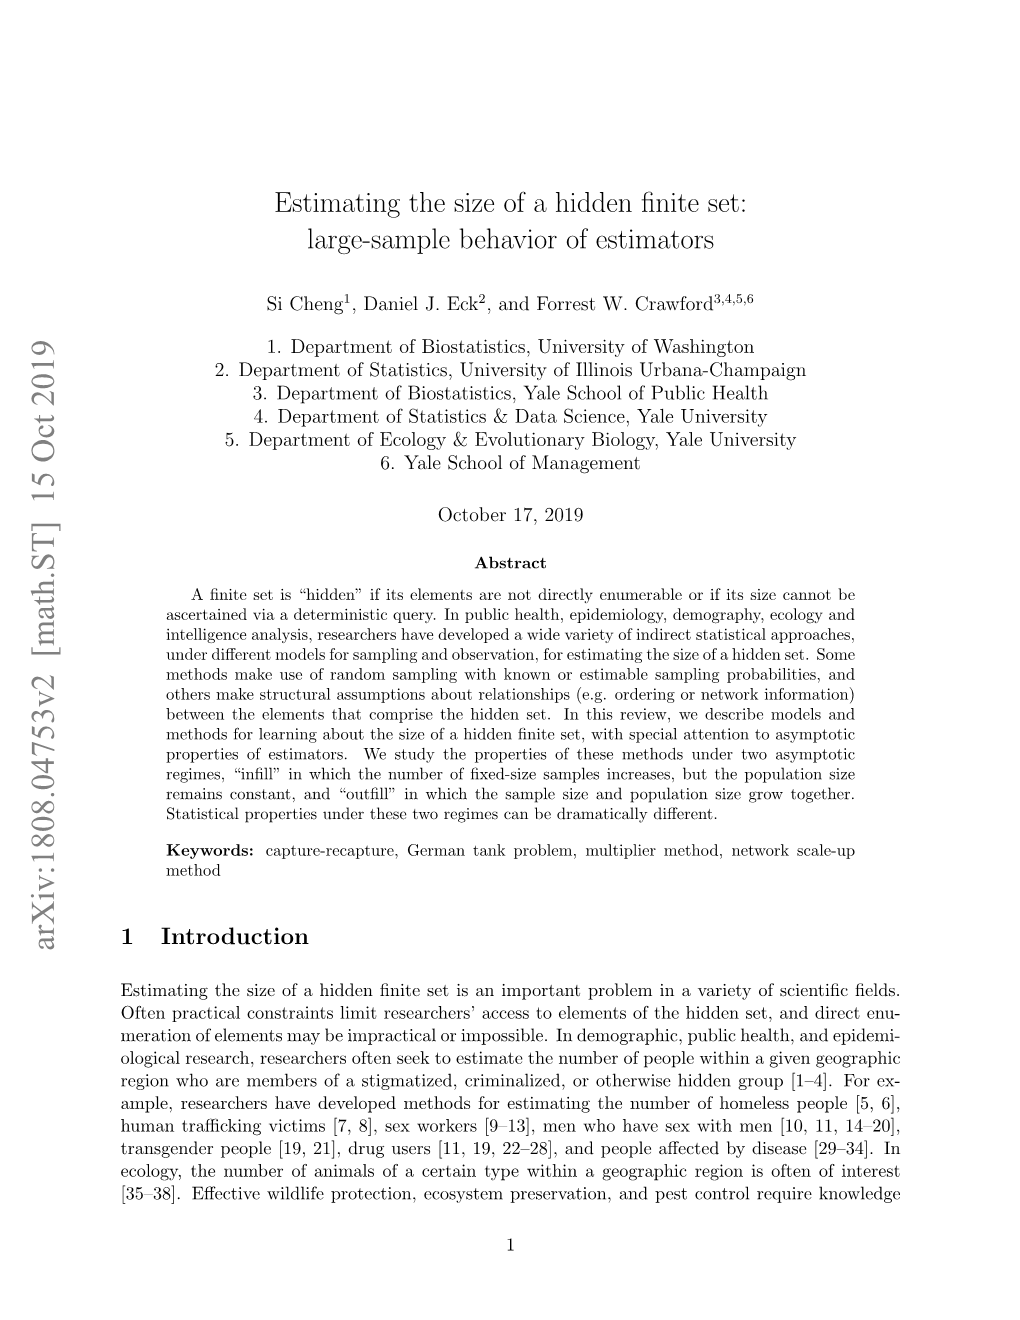 Estimating the Size of a Hidden Finite